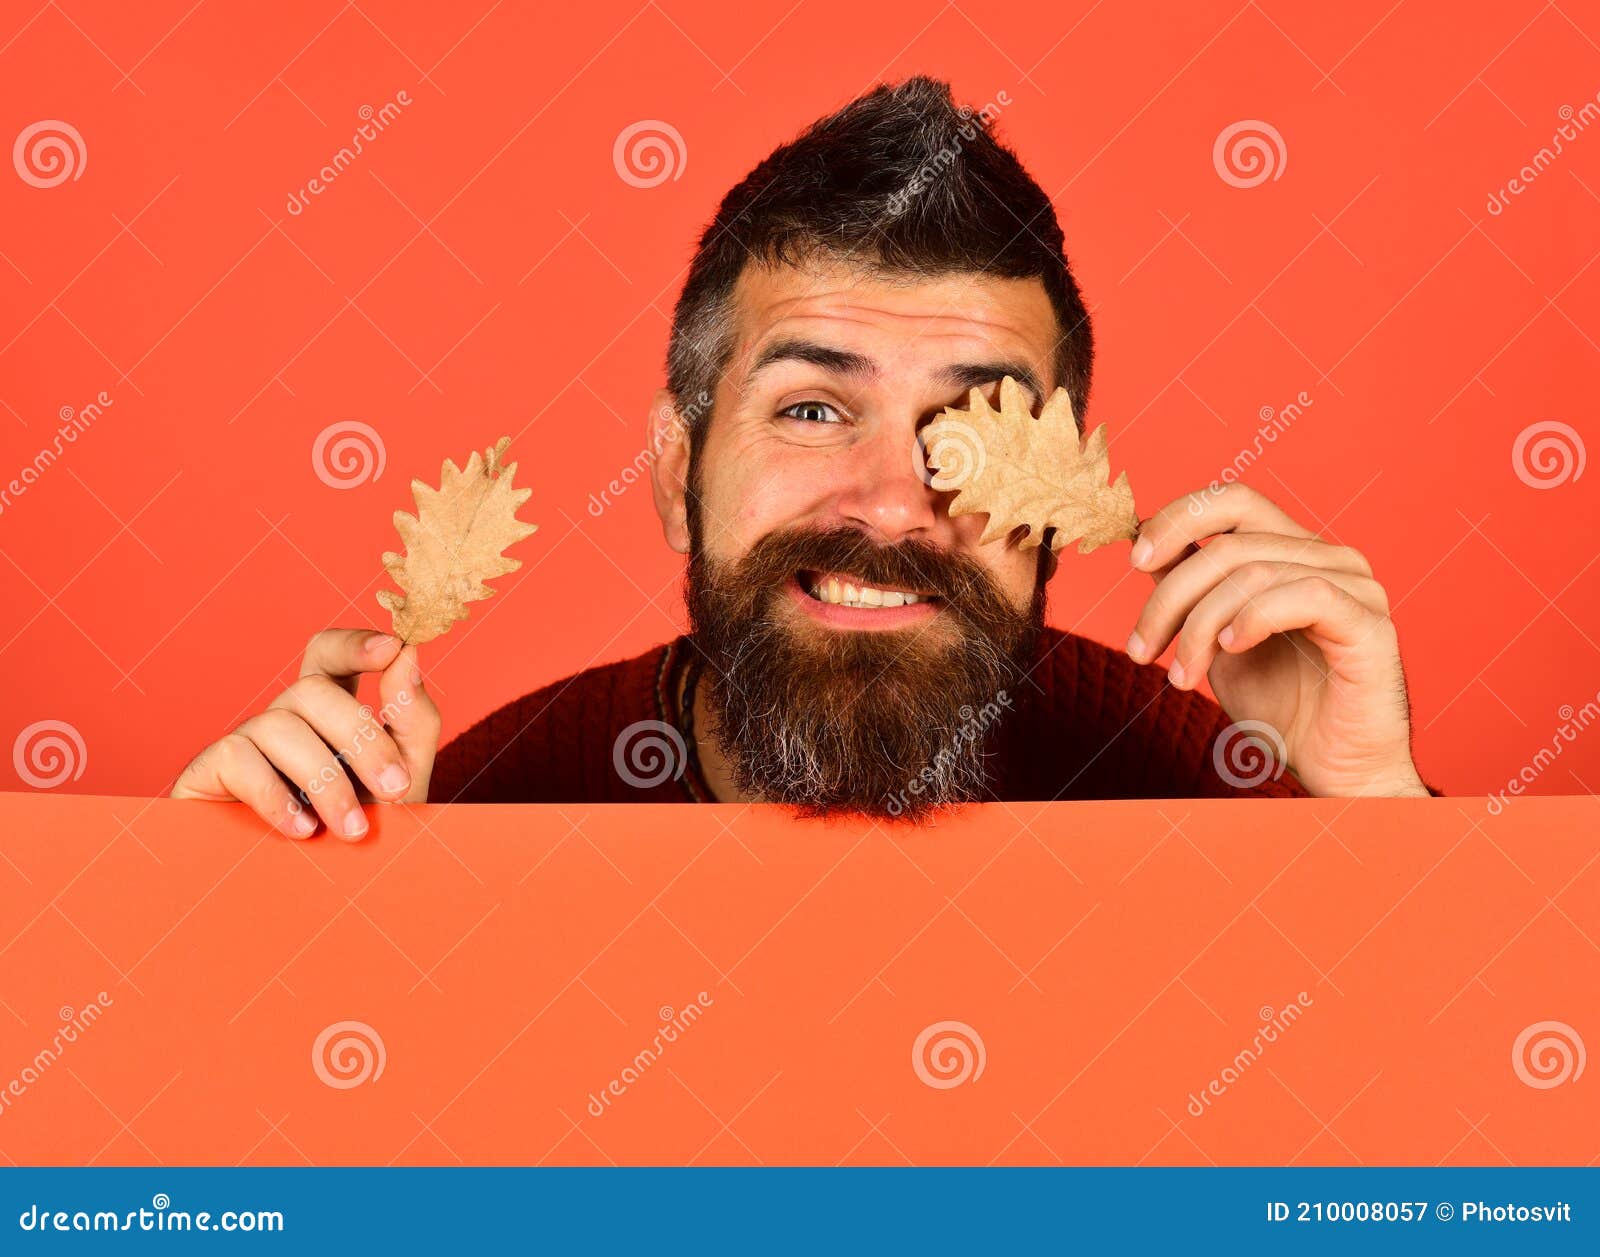 Autumn And Cold Weather Hipster With Beard And Indicisive Face Stock Image Image Of Weather